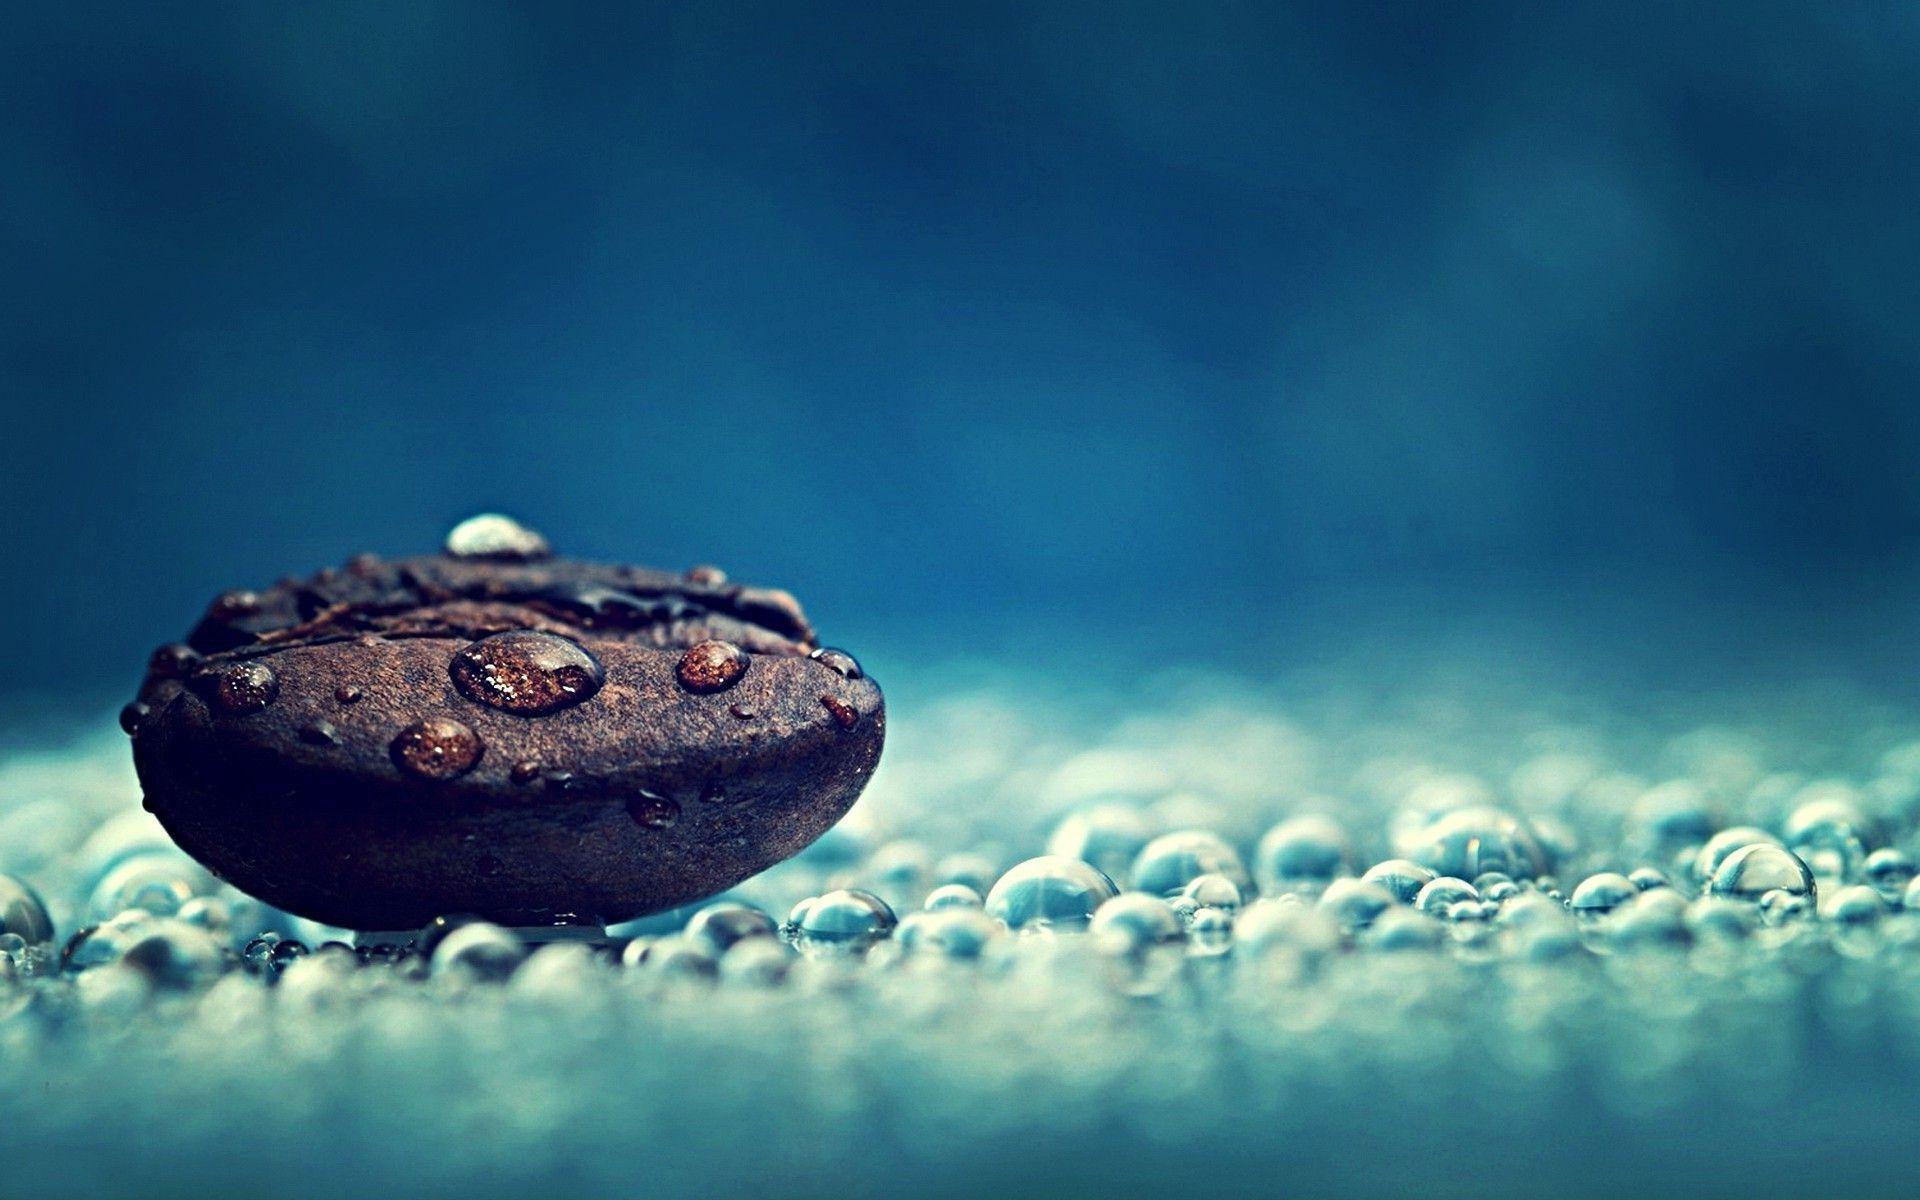 Free Download Water Drop Hd Wallpapers 1920x1200 For Your Desktop Mobile And Tablet Explore